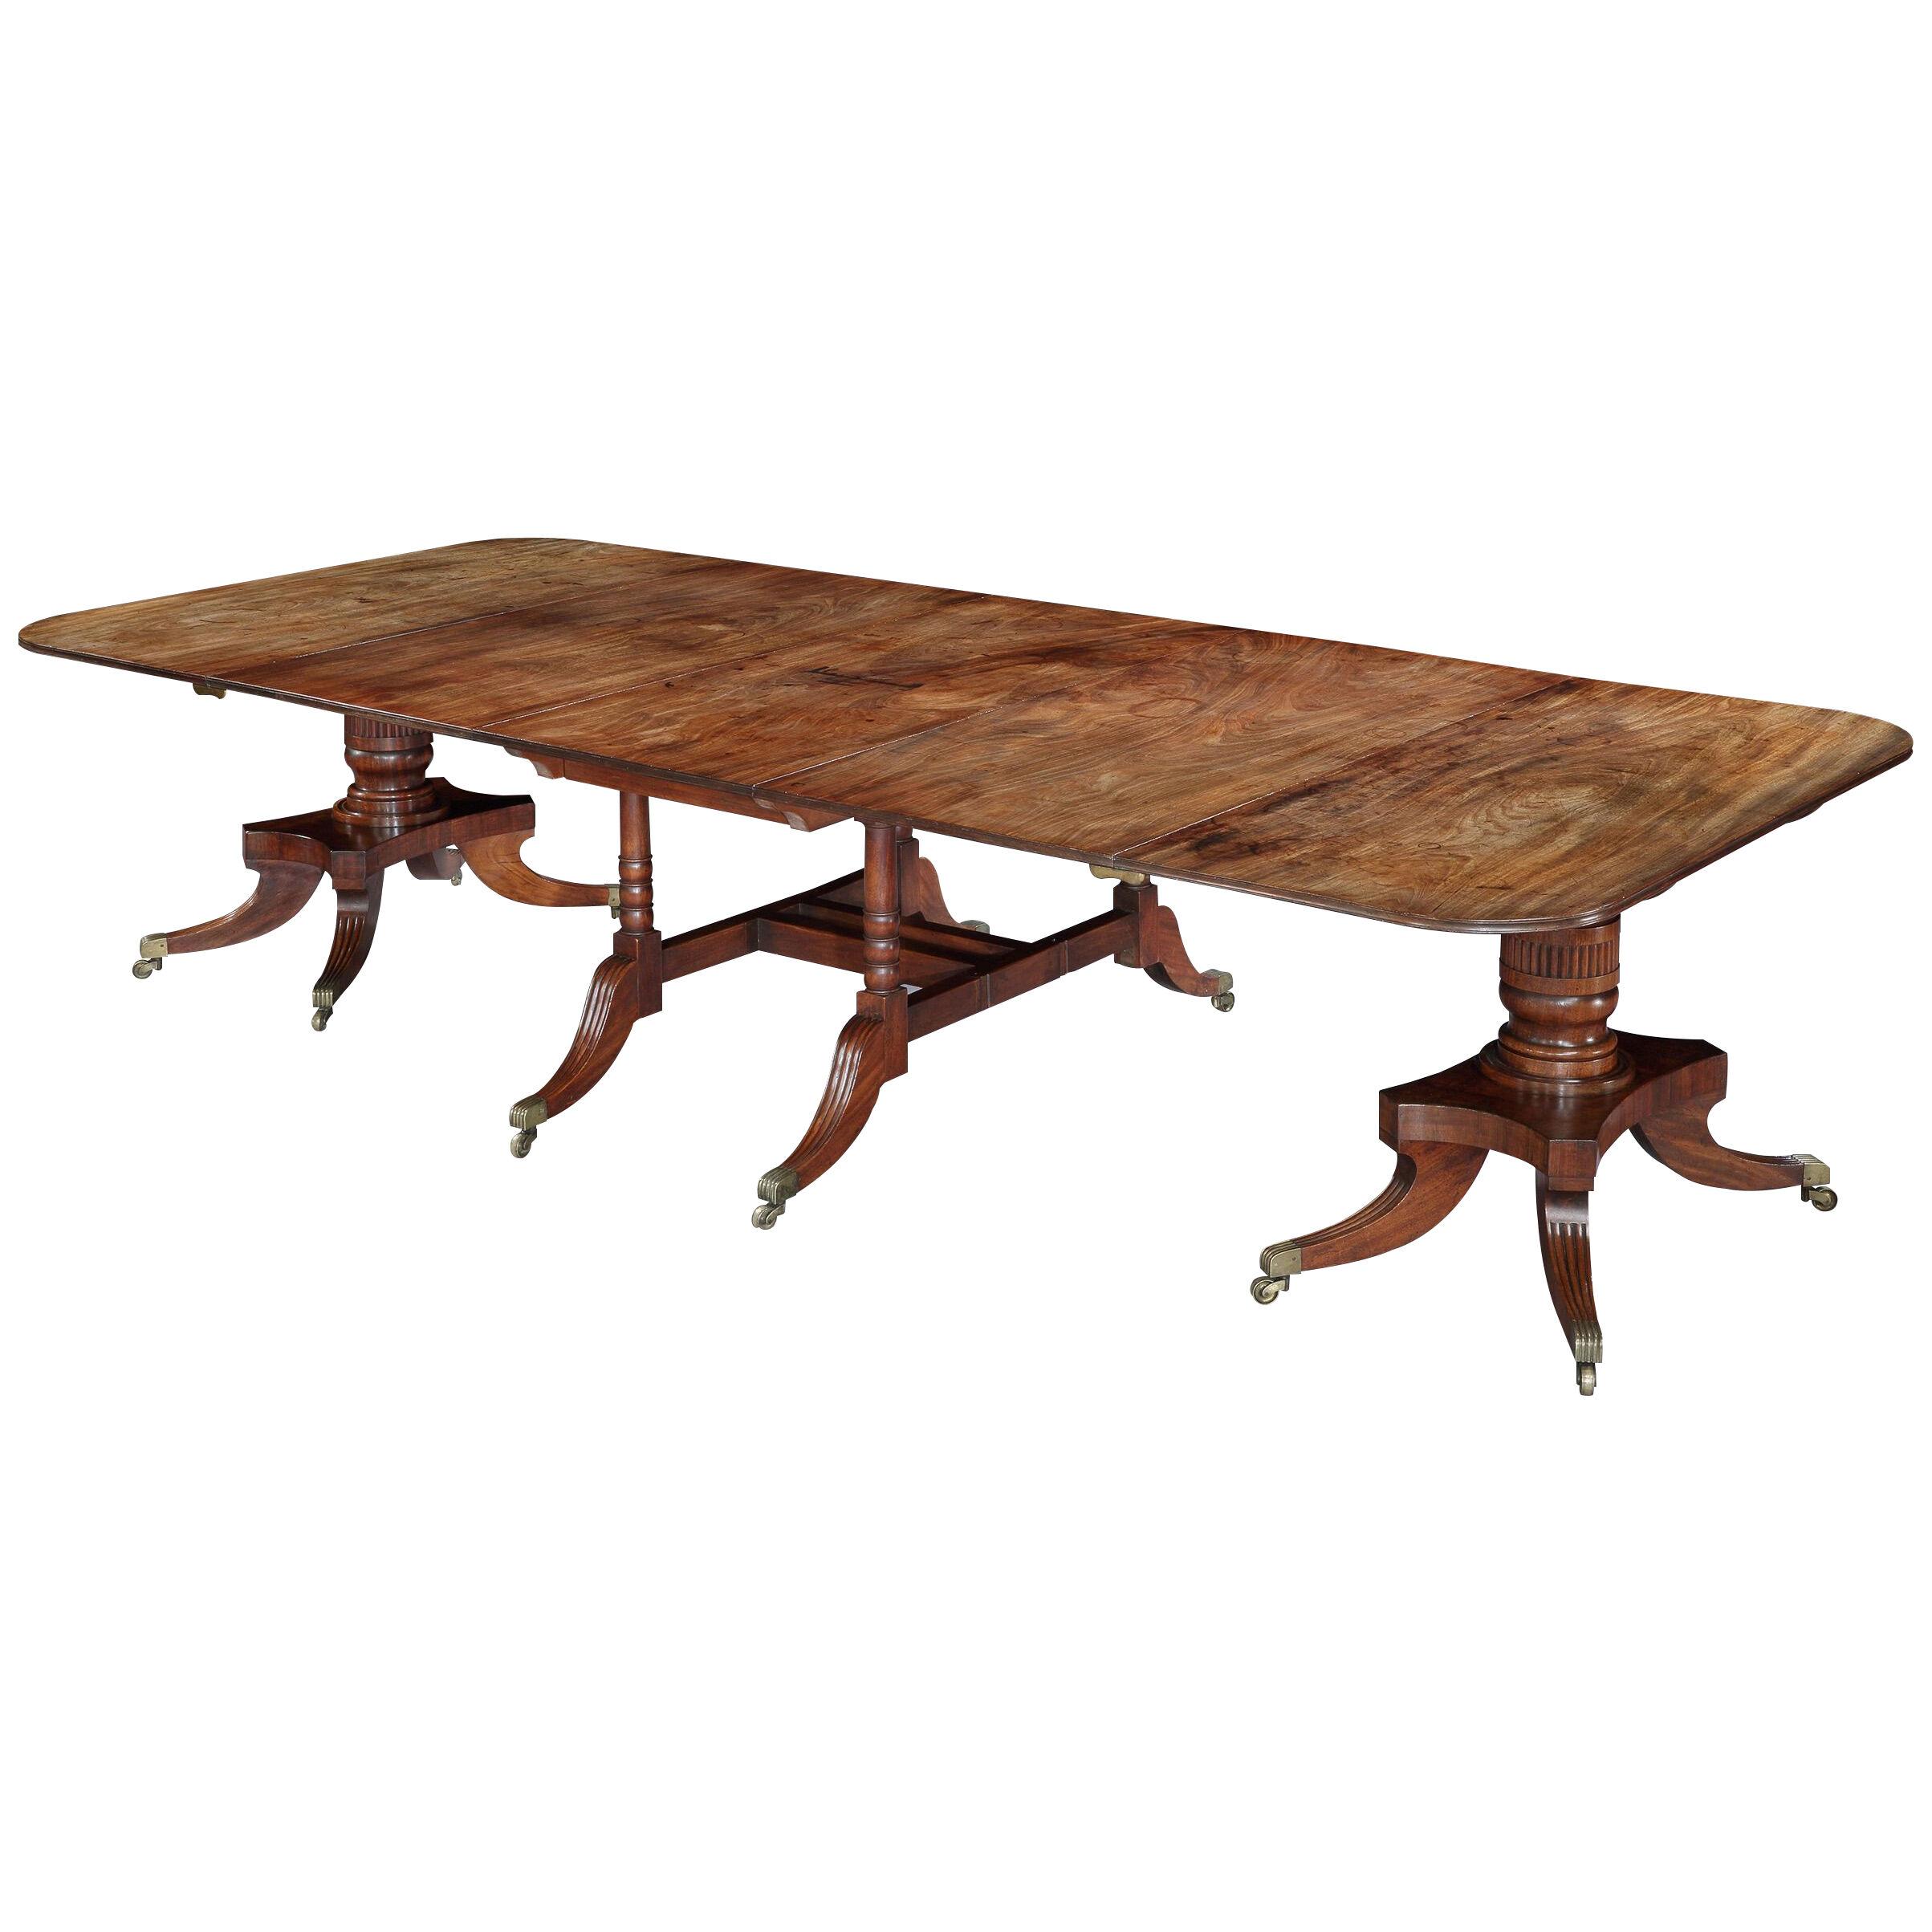 Mahogany Extending Dining Table of the Late Georgian Period